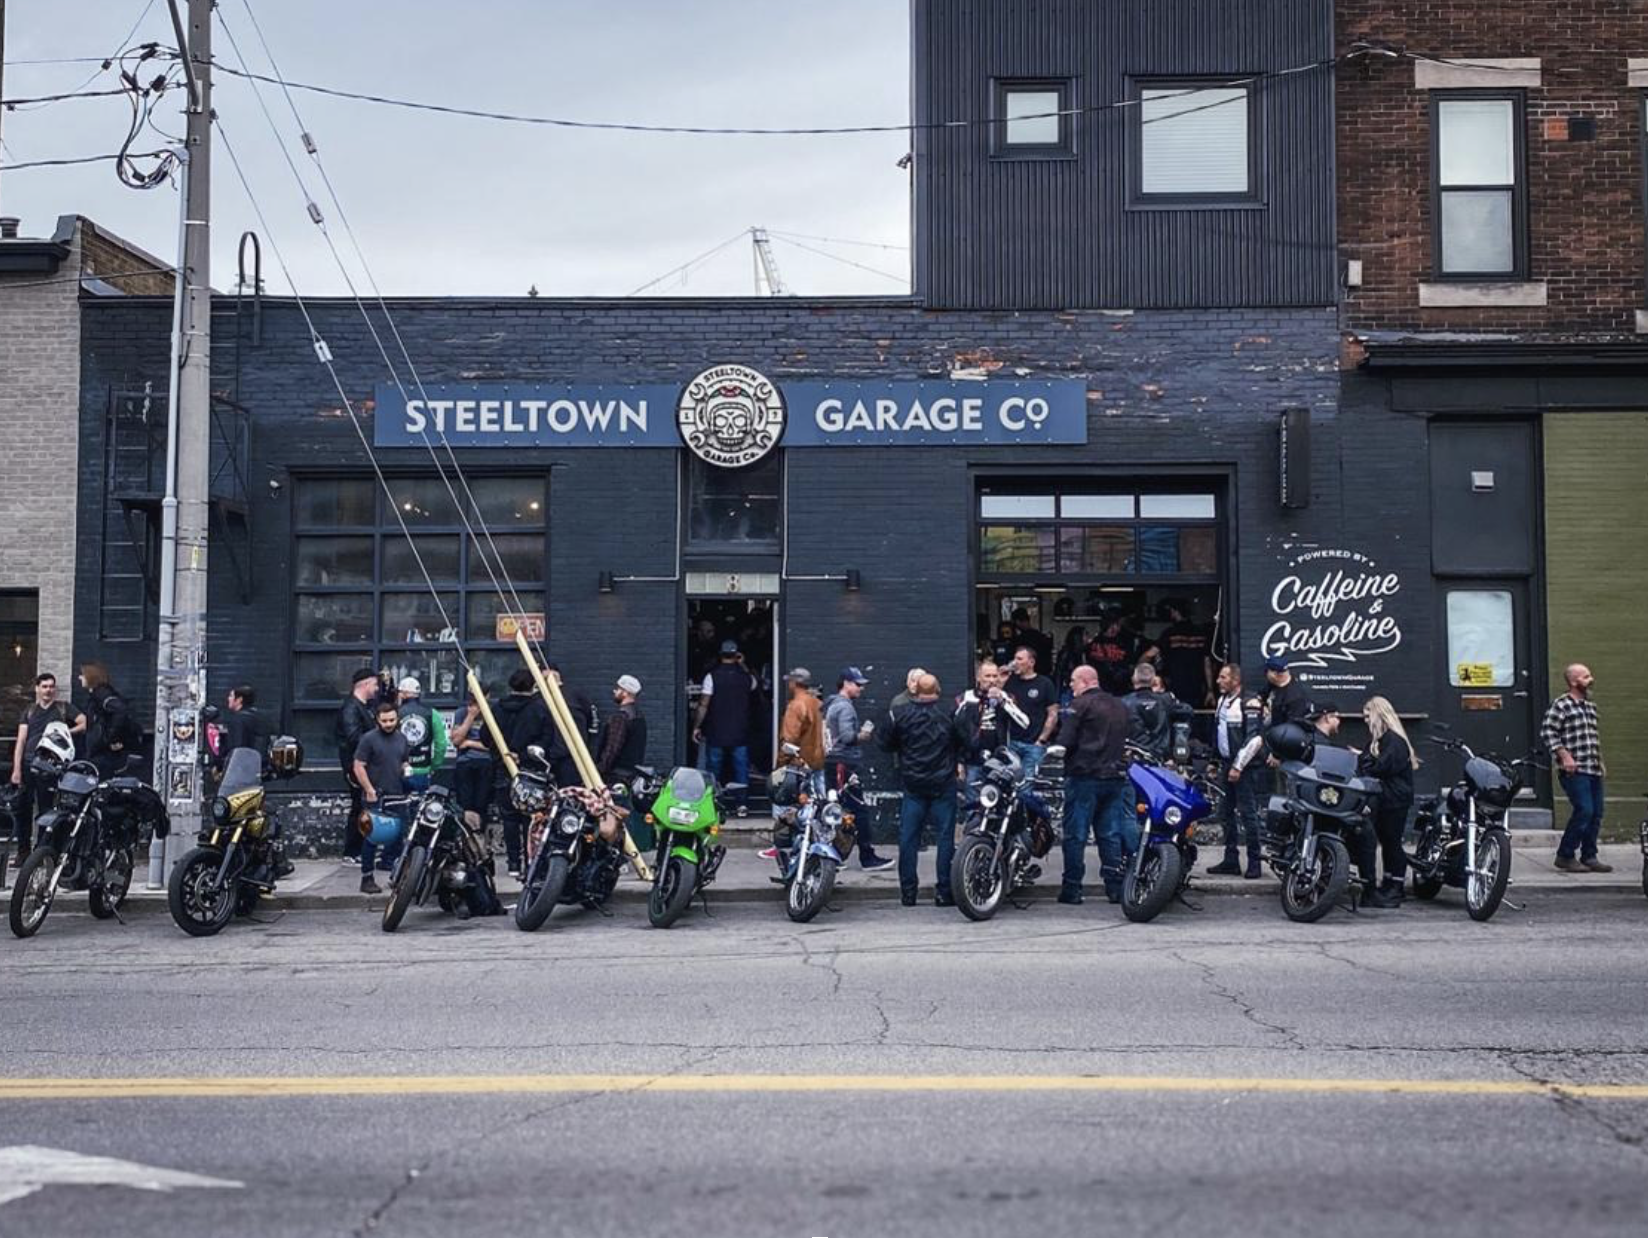 A row of parked motorcycles on the street in front of a dark blue business with the sign "Steeltown Garage". Riders are talking in a group on the sidewalk.